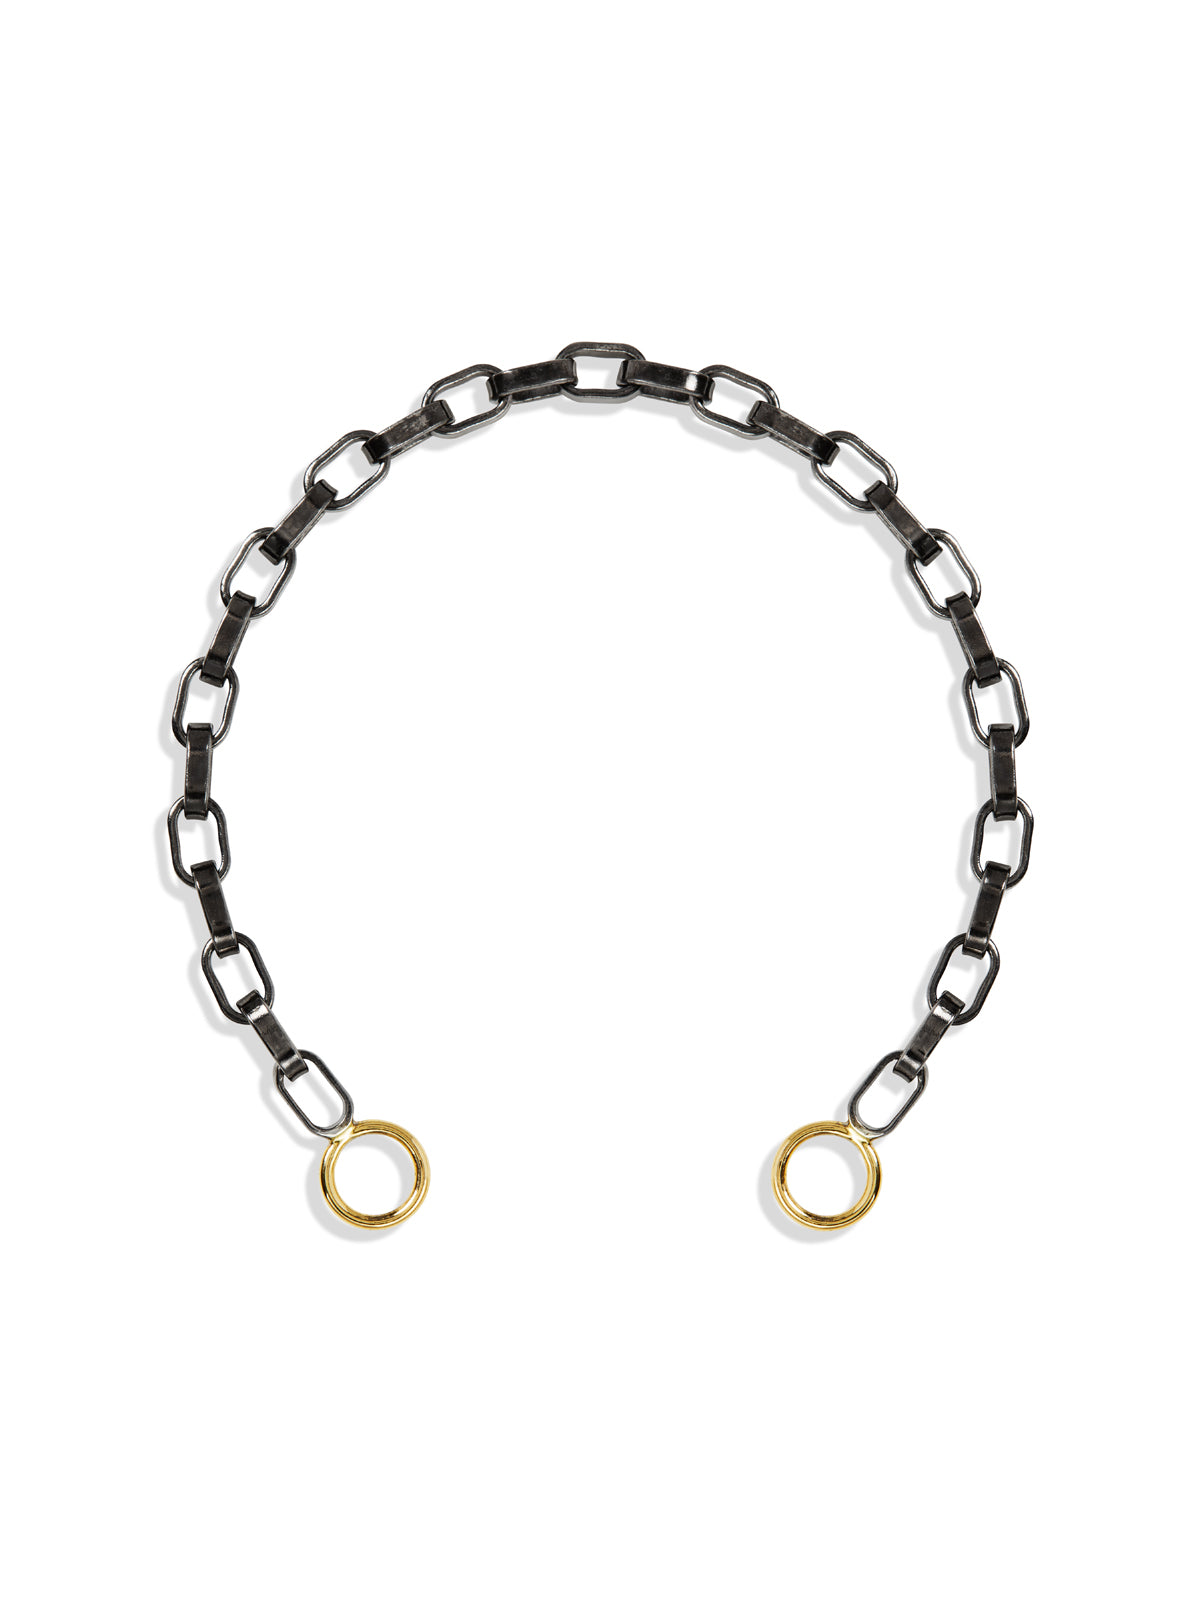 Photos - Bracelet Biker Chain with Yellow Gold Loops , 6